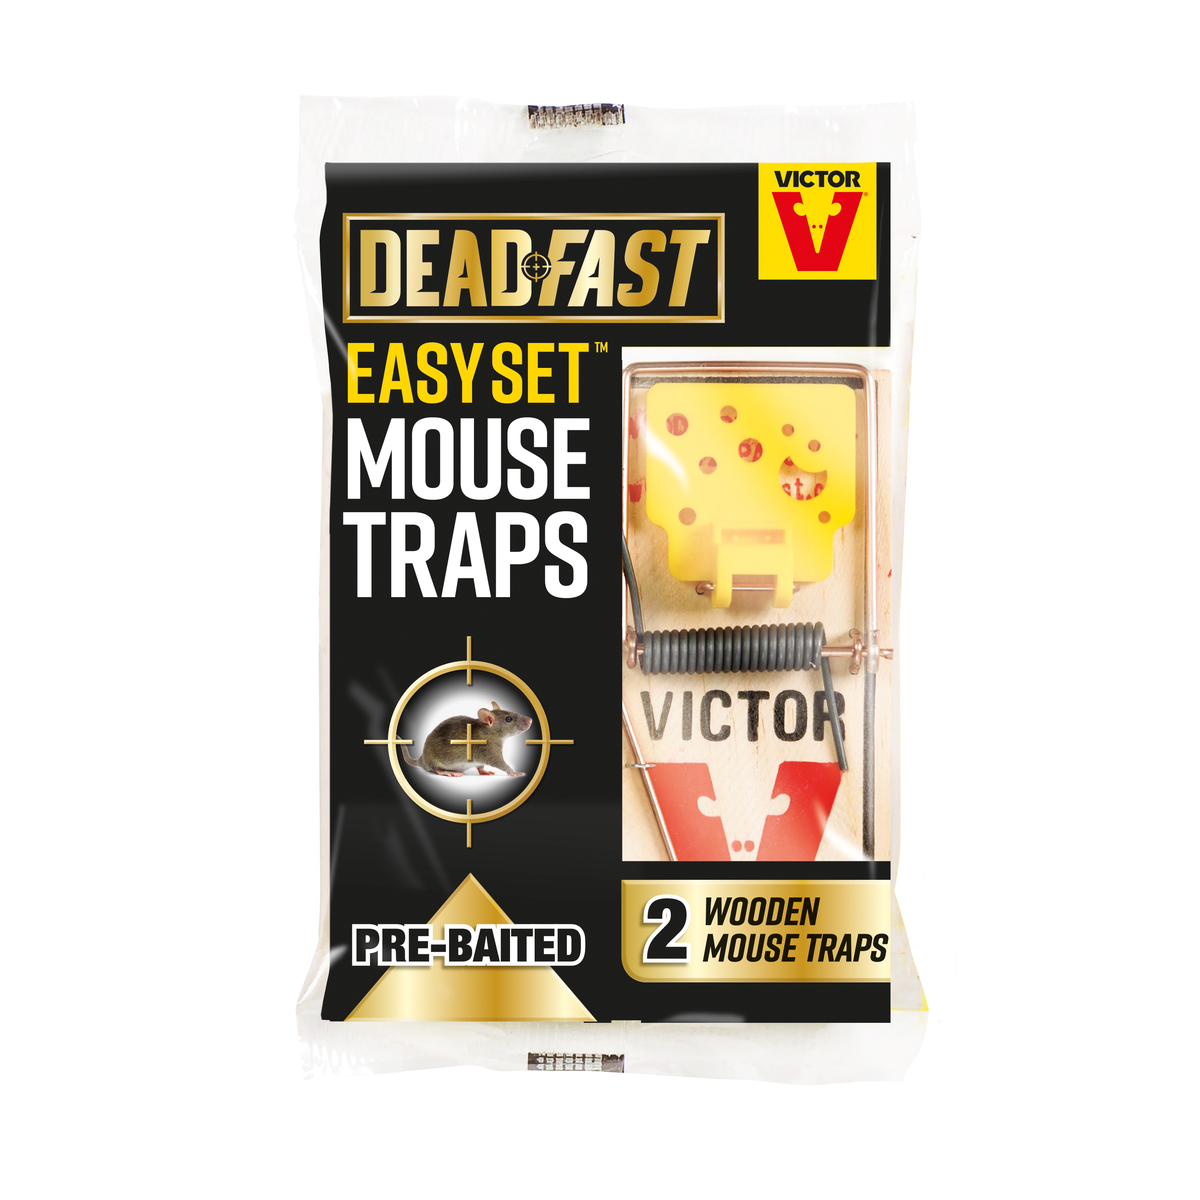 Victor Easy Set Mouse Trap